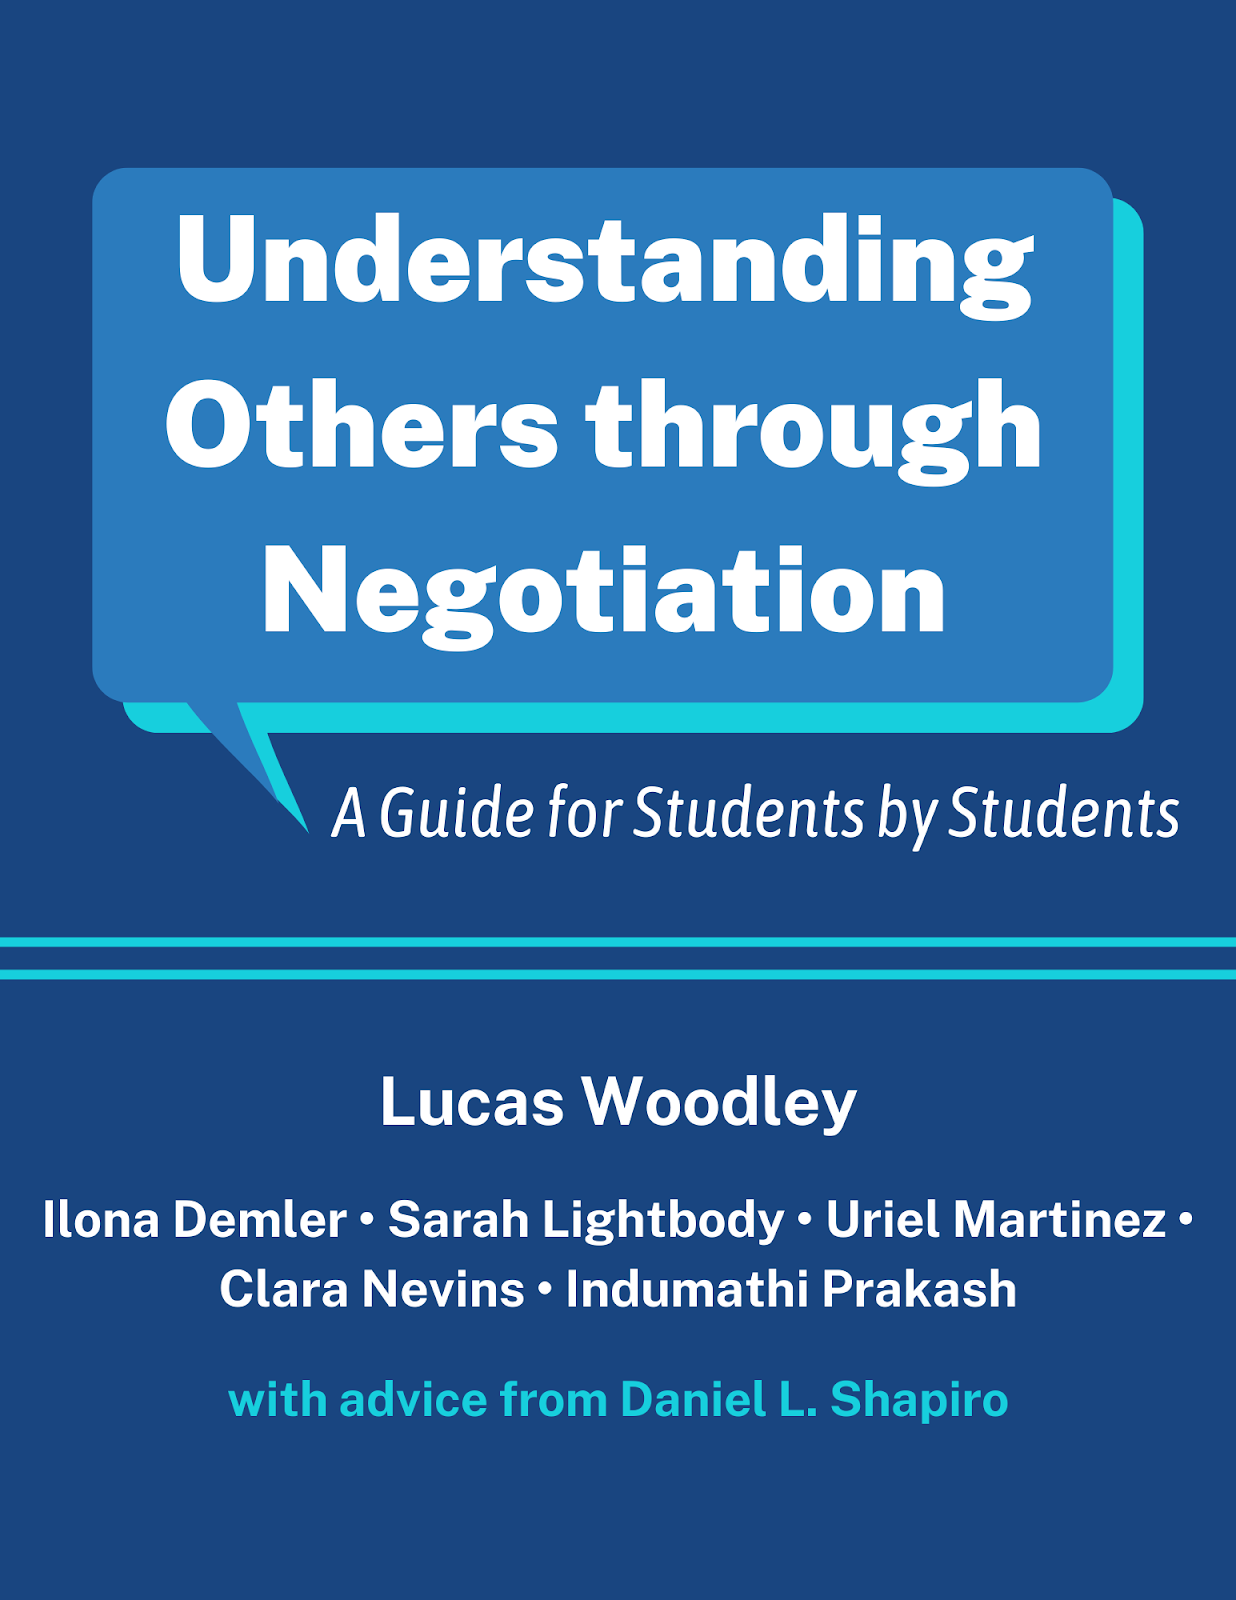 Flyer for student-produced book on negotiation. Title reads: "Understanding Others through Negotiation.